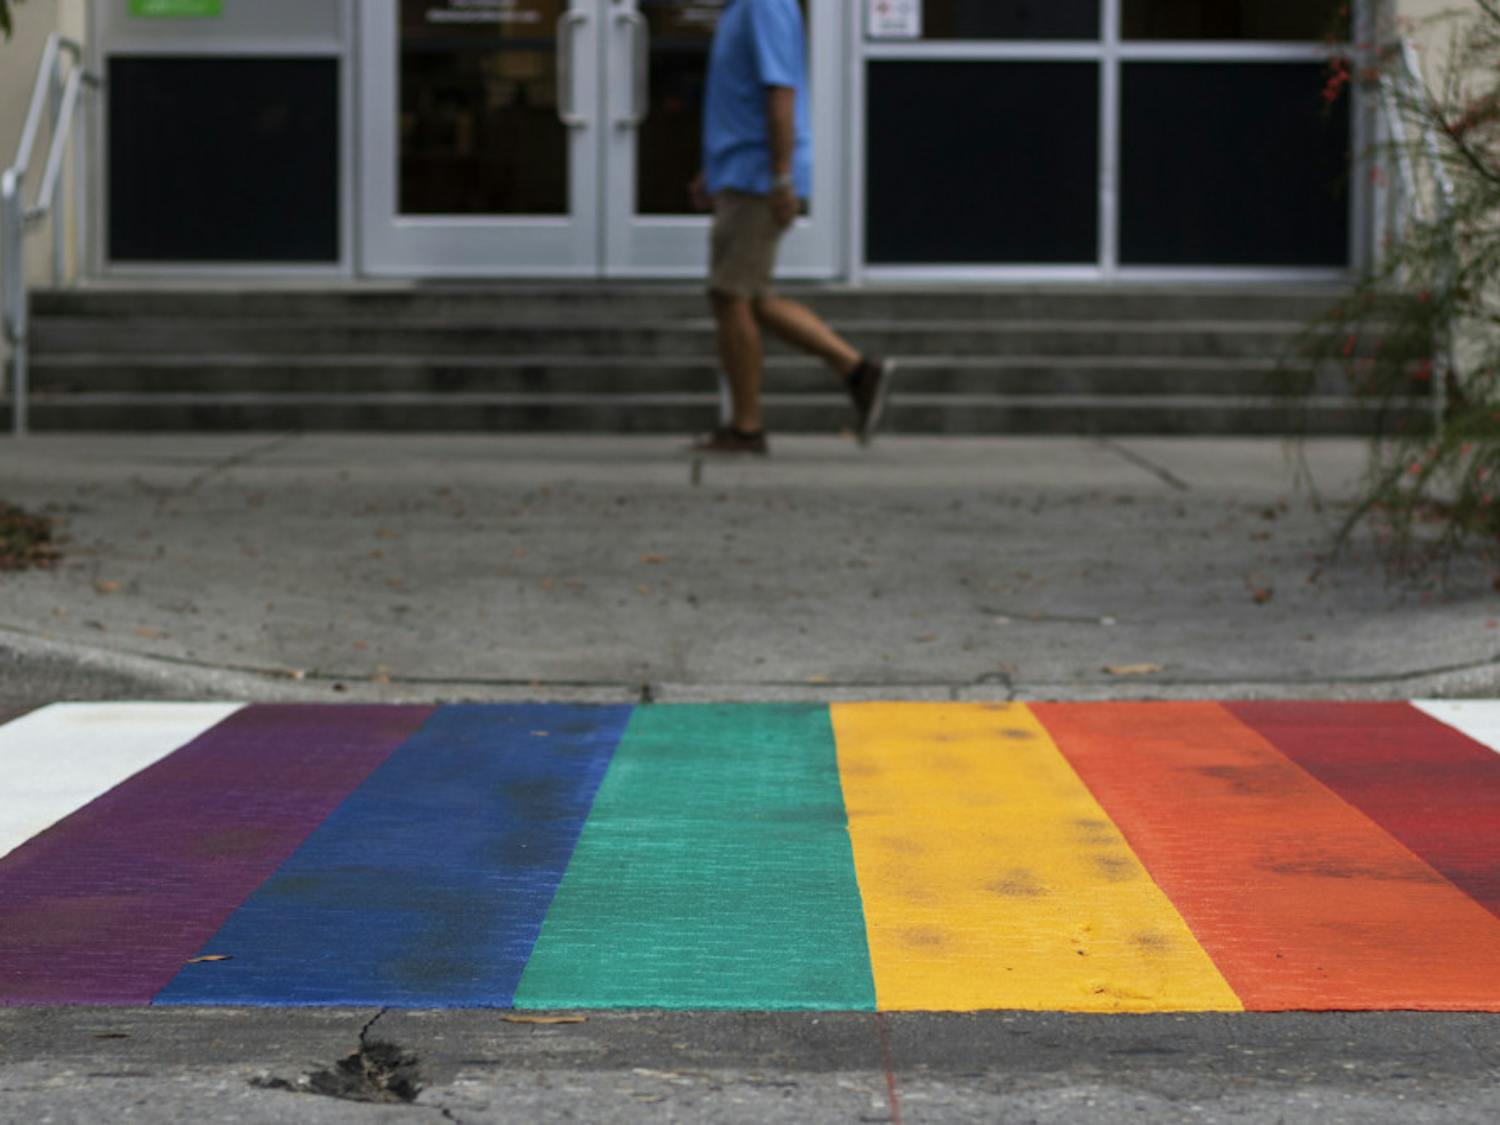 A pedestrian walks past one of the rainbow crosswalks Tuesday evening in downtown Gainesville near Bo Diddley Plaza.